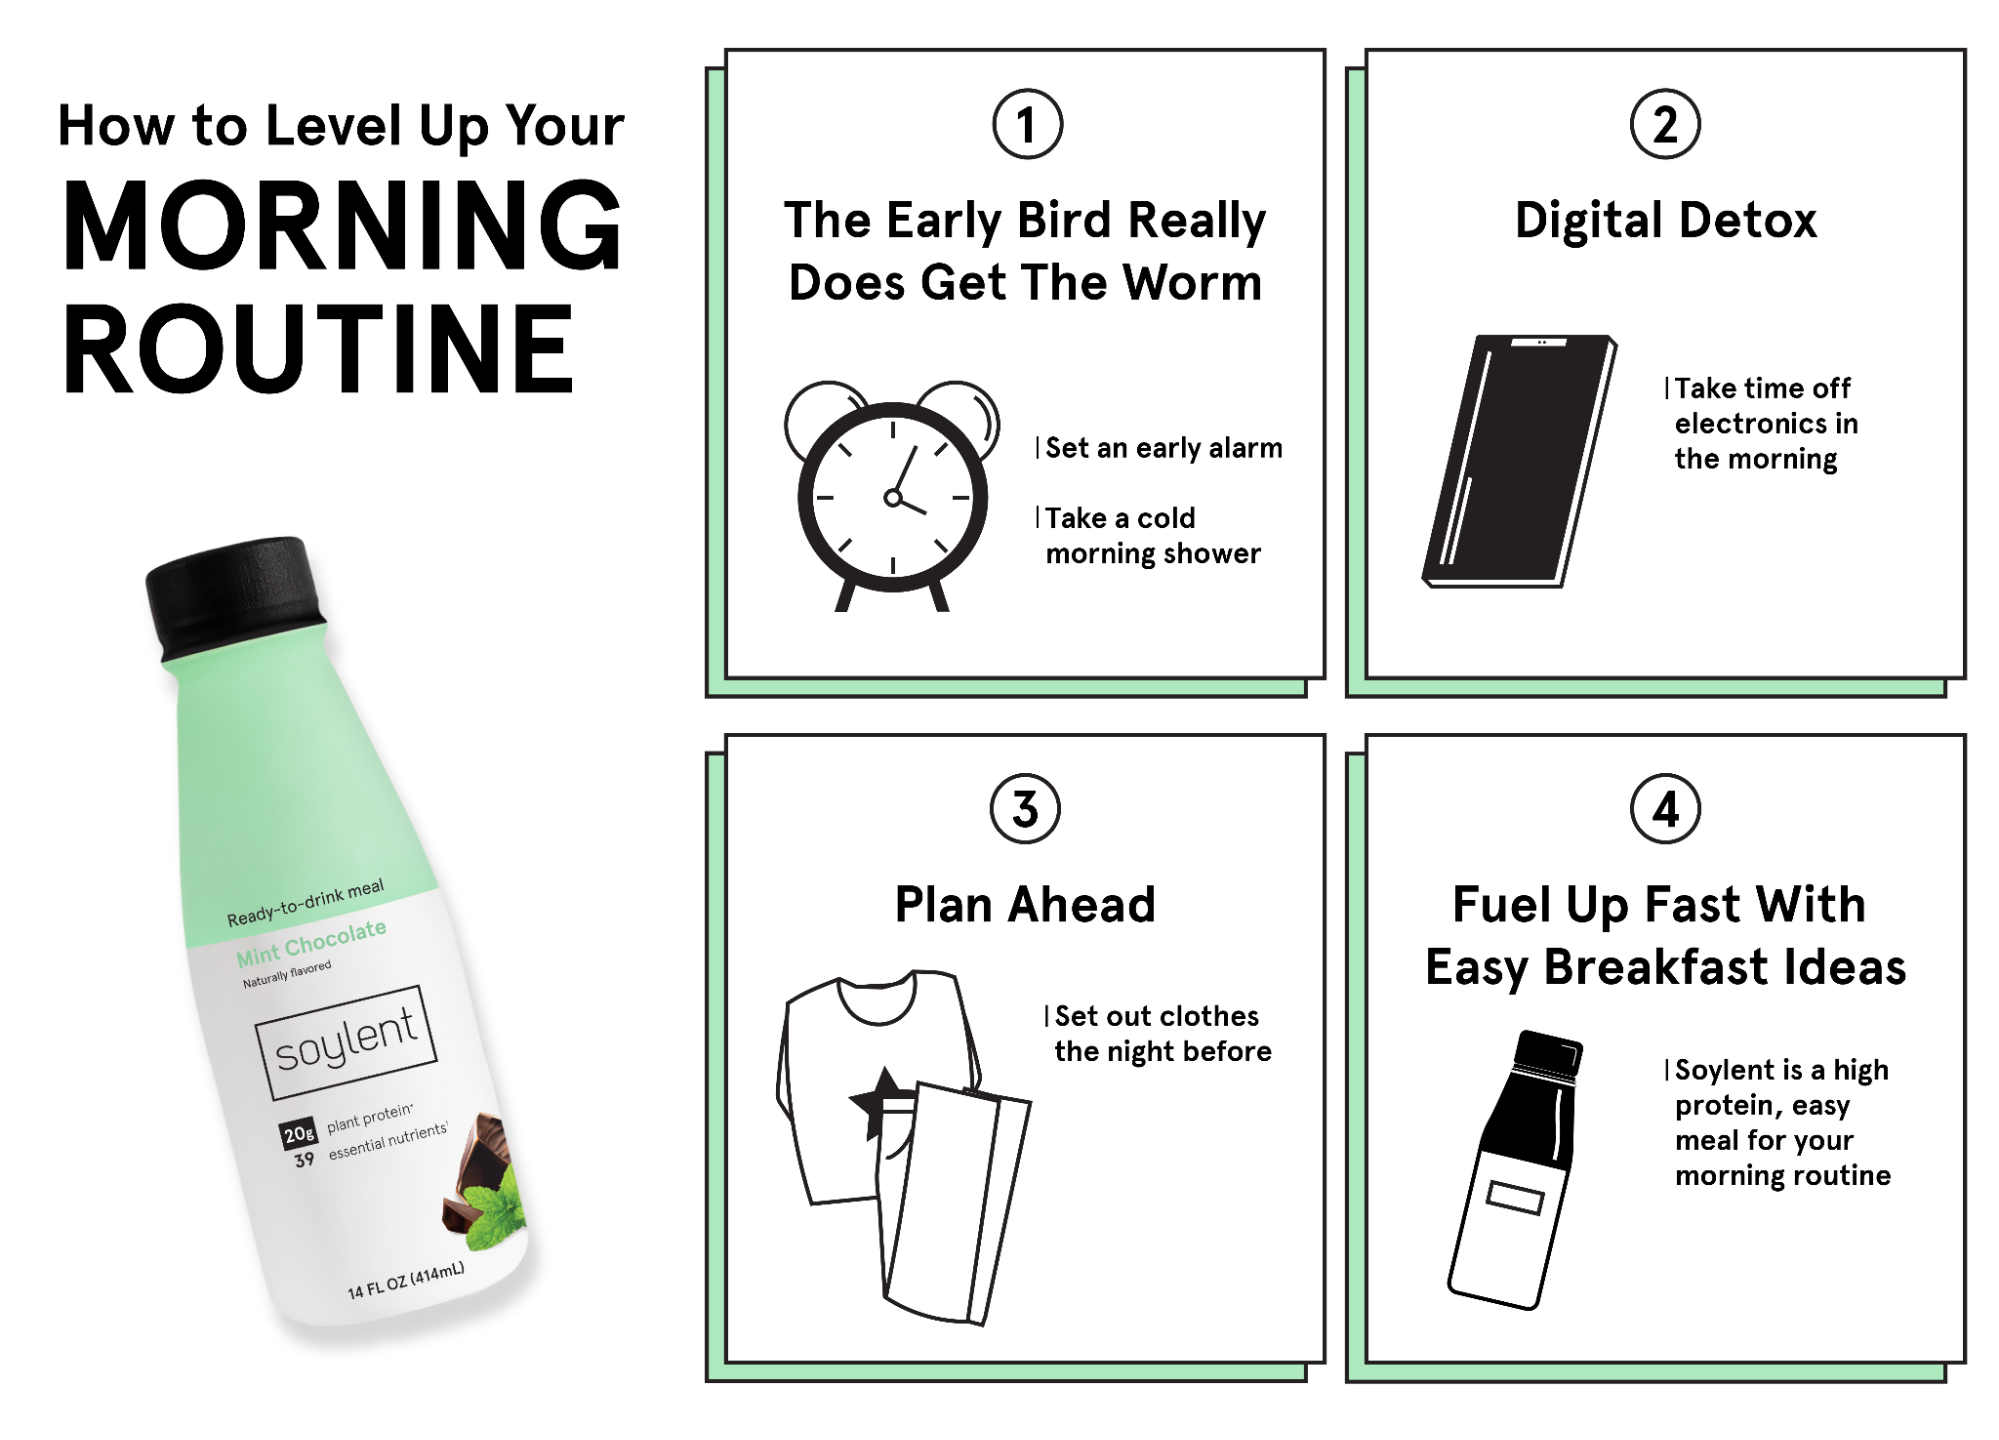 How to level up your morning routine by Soylent